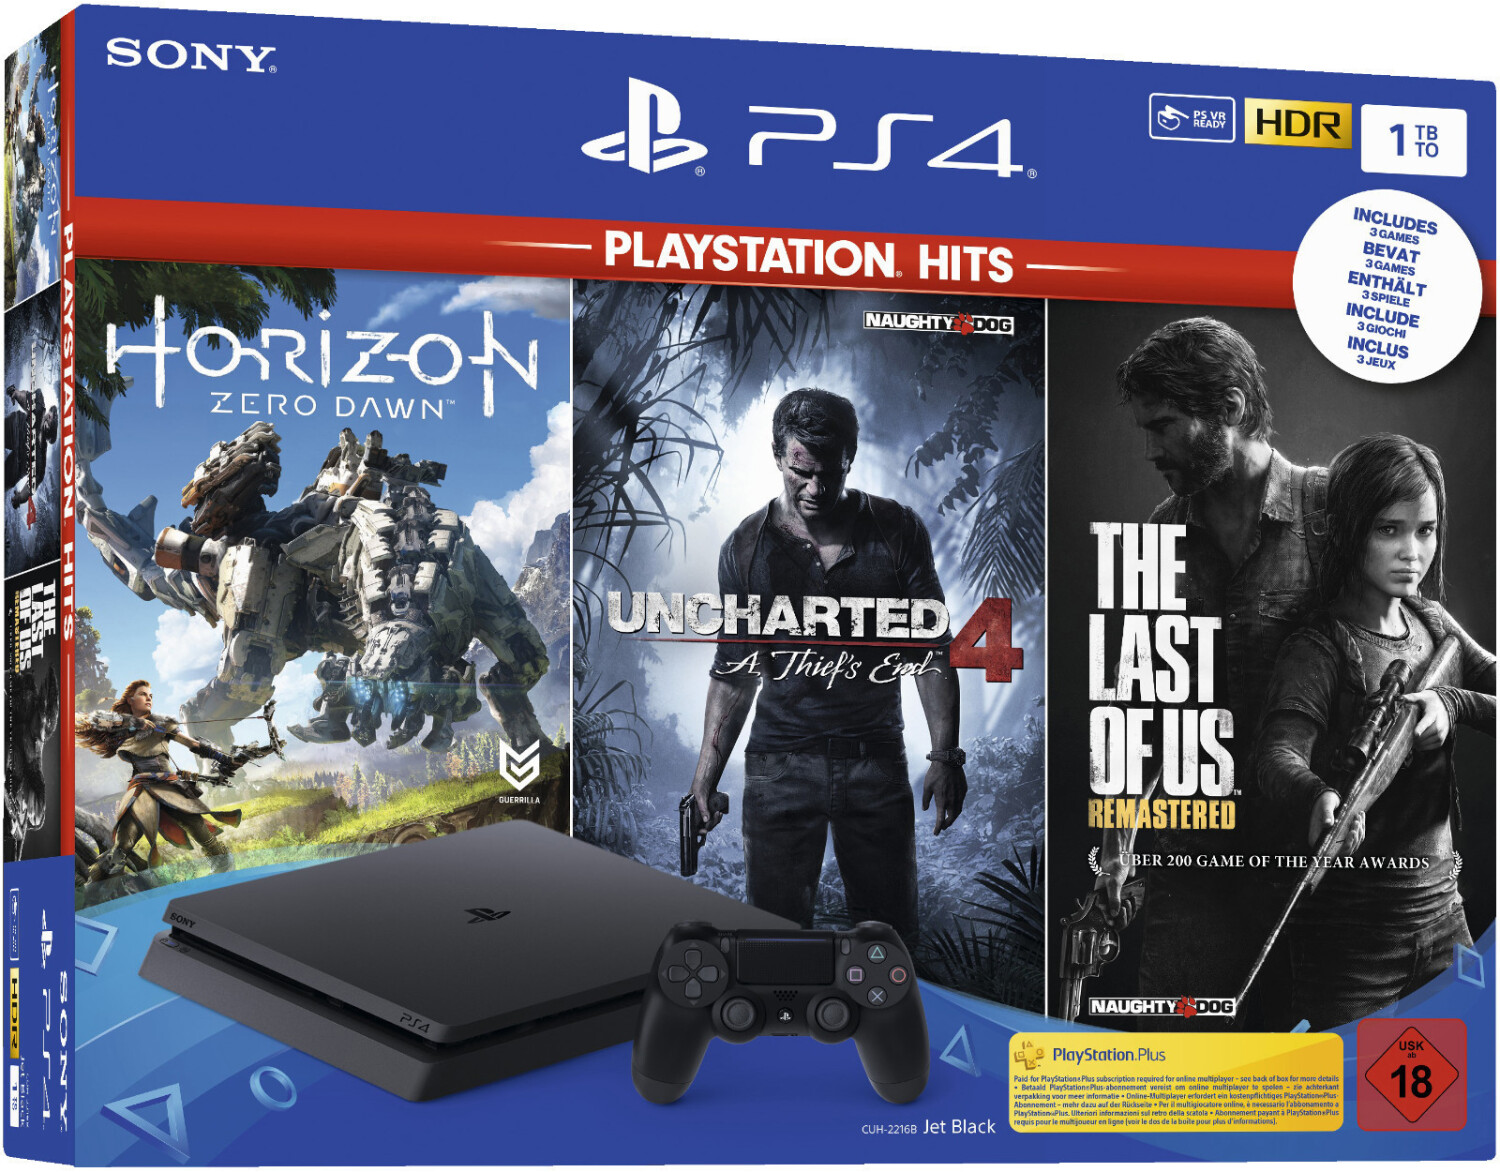 Sony PlayStation 4 (PS4) Slim 1TB + Horizon: Zero Dawn - Complete Edition + Uncharted 4: A Thief's End + The Last of Us: Remastered